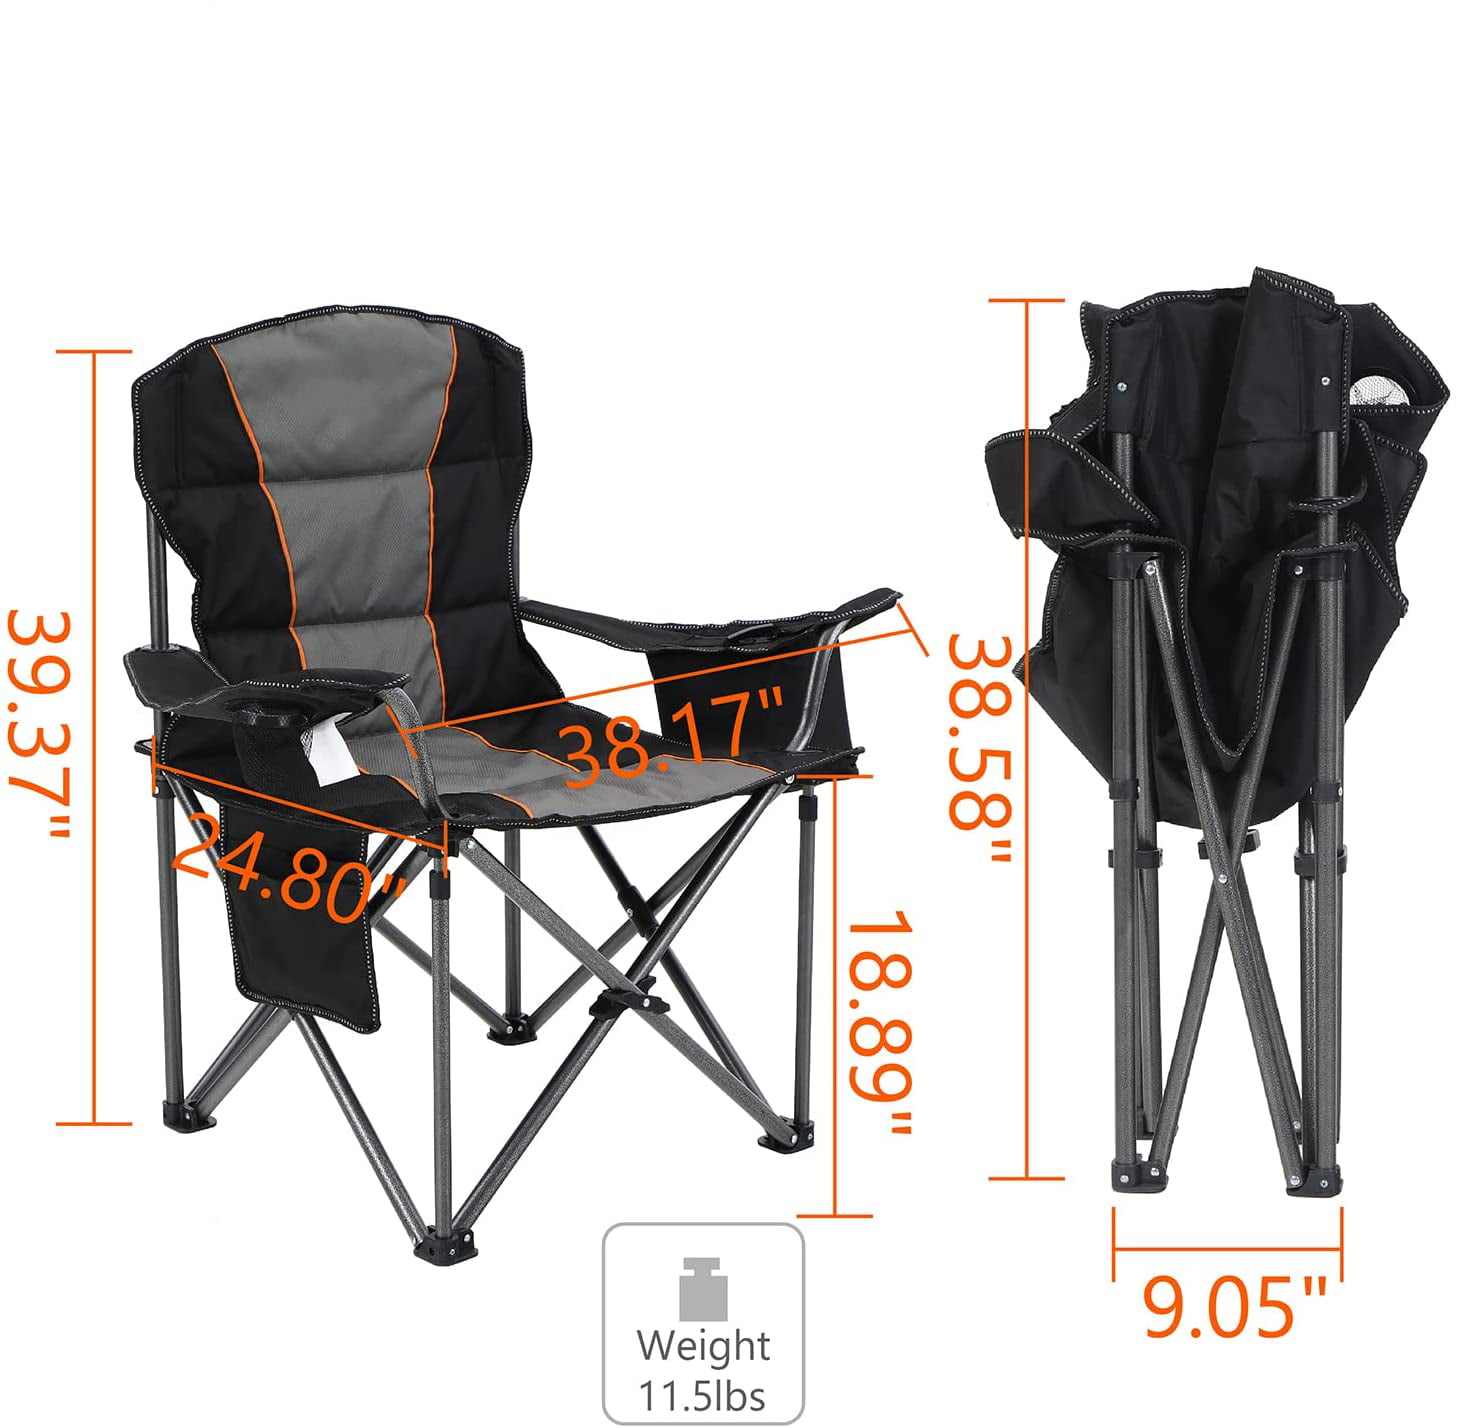 Folding Camping Chair Oversized Padded Arm Collapsible Steel Frame Heavy Duty 